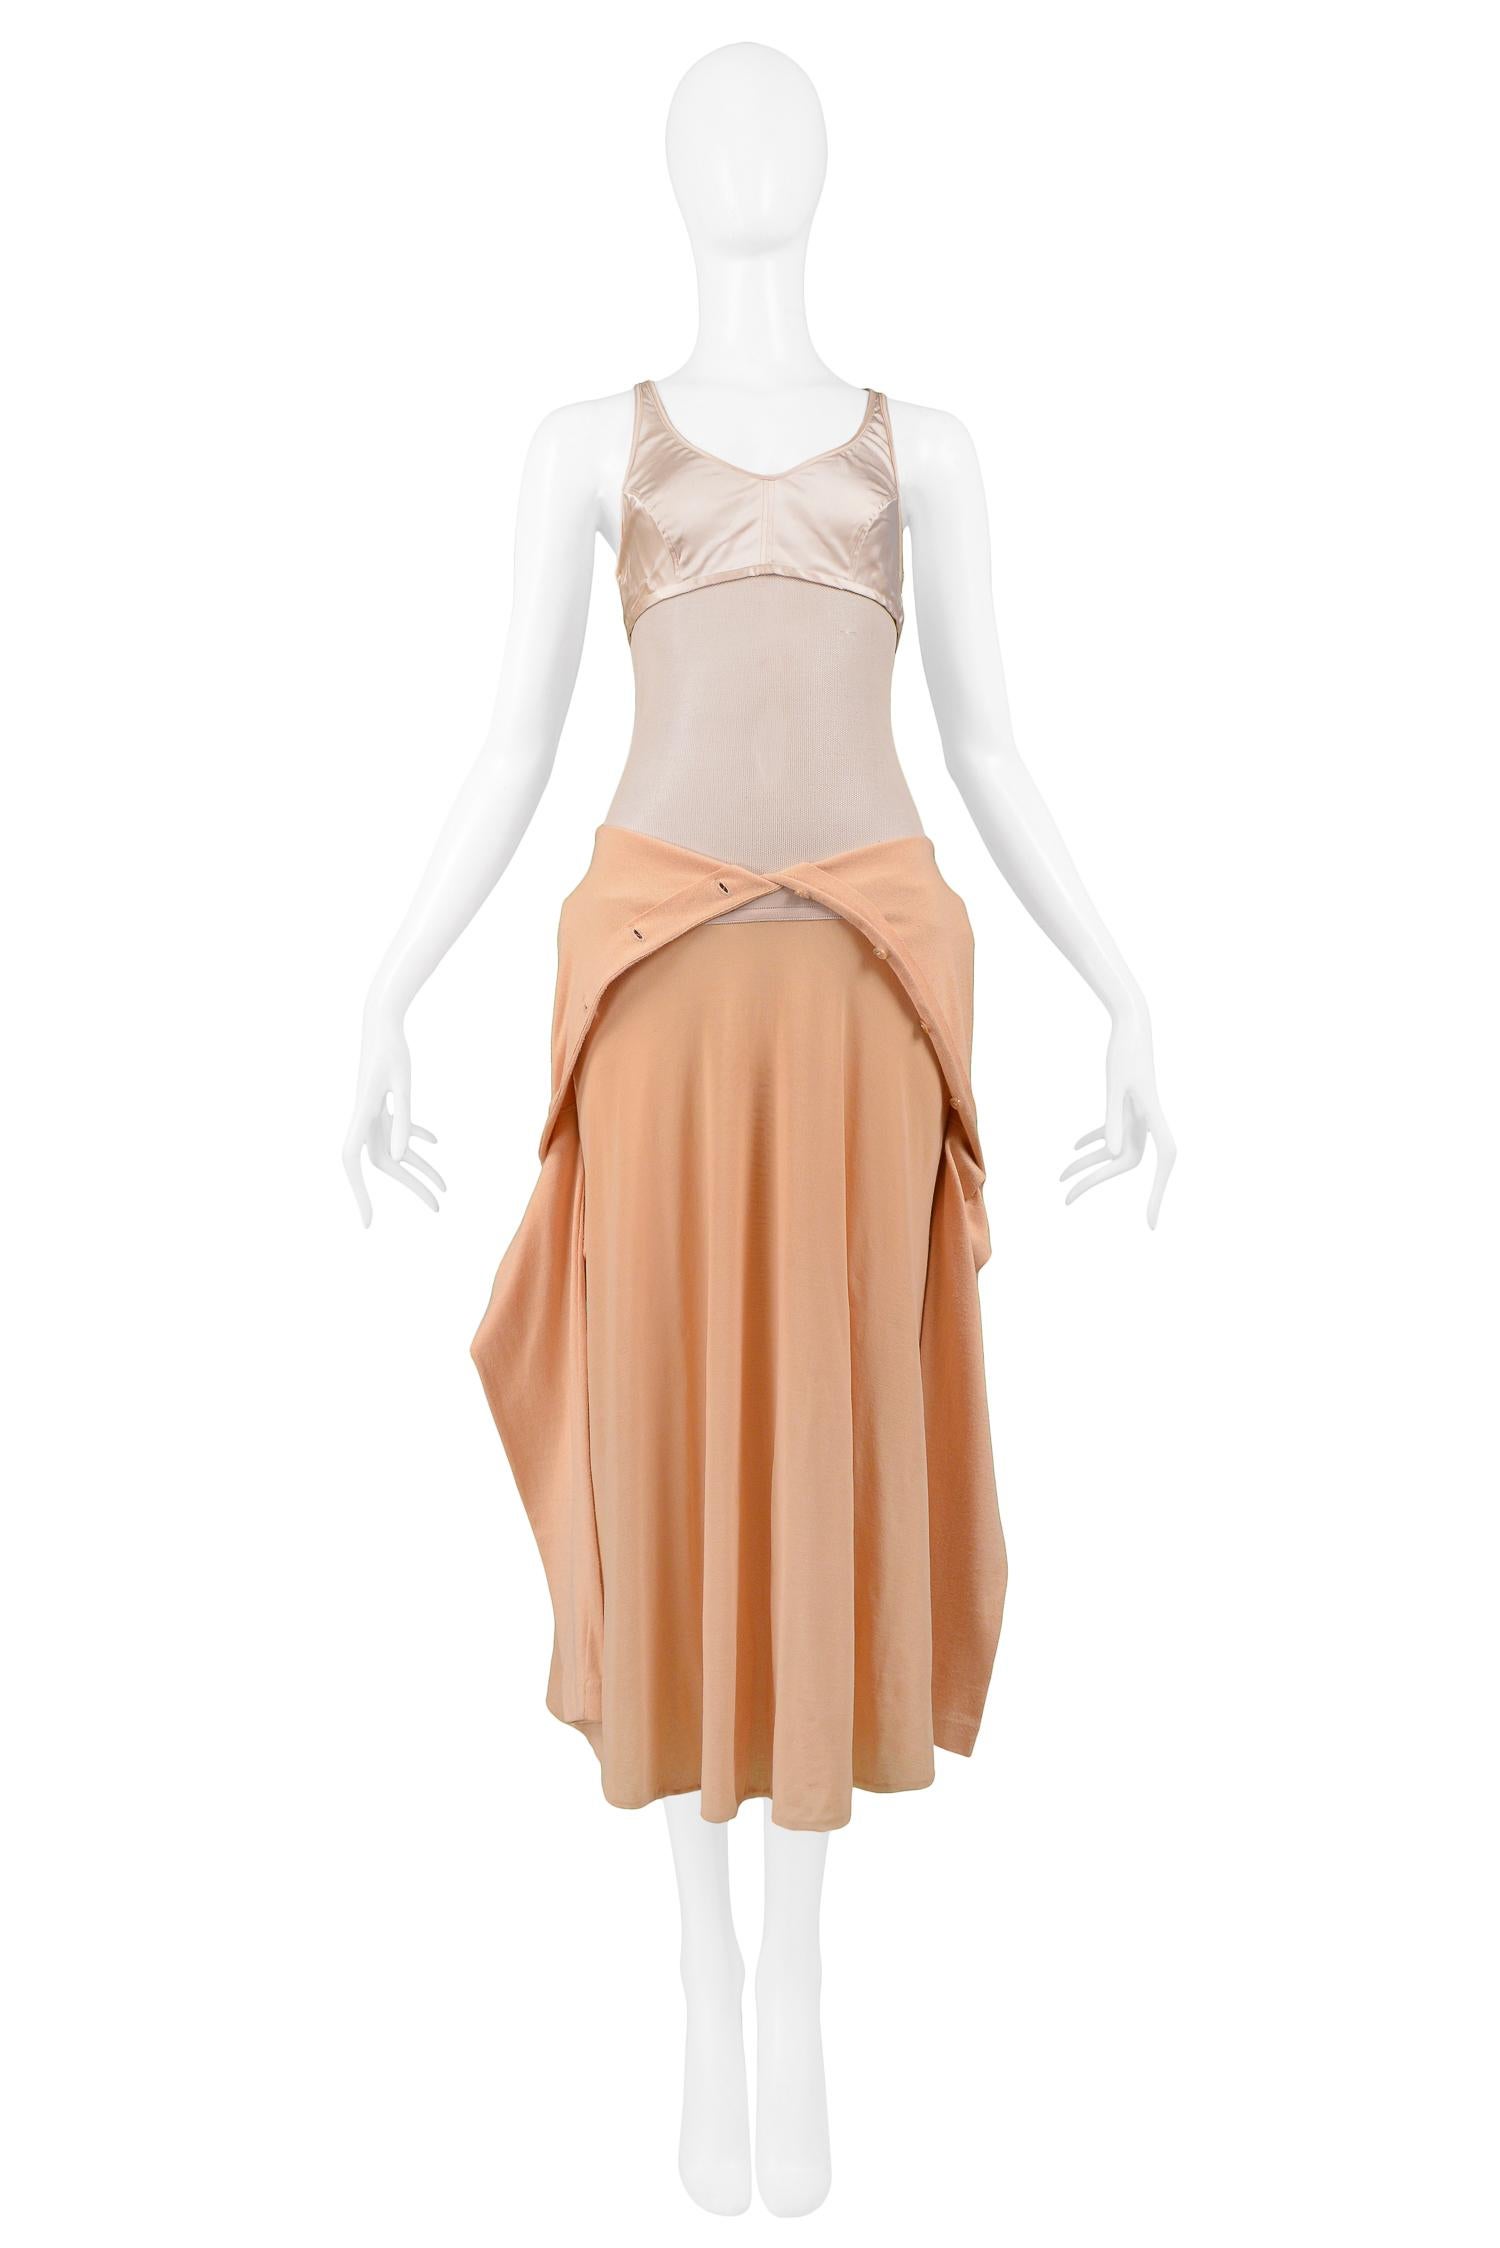 Vintage early Helmut Lang peach dress with champagne beige bra top and attached button front peach cardigan that can be worn as a cardigan or draped or tied at the waist. Collection 1990.

Excellent Vintage Condition.

Size 40